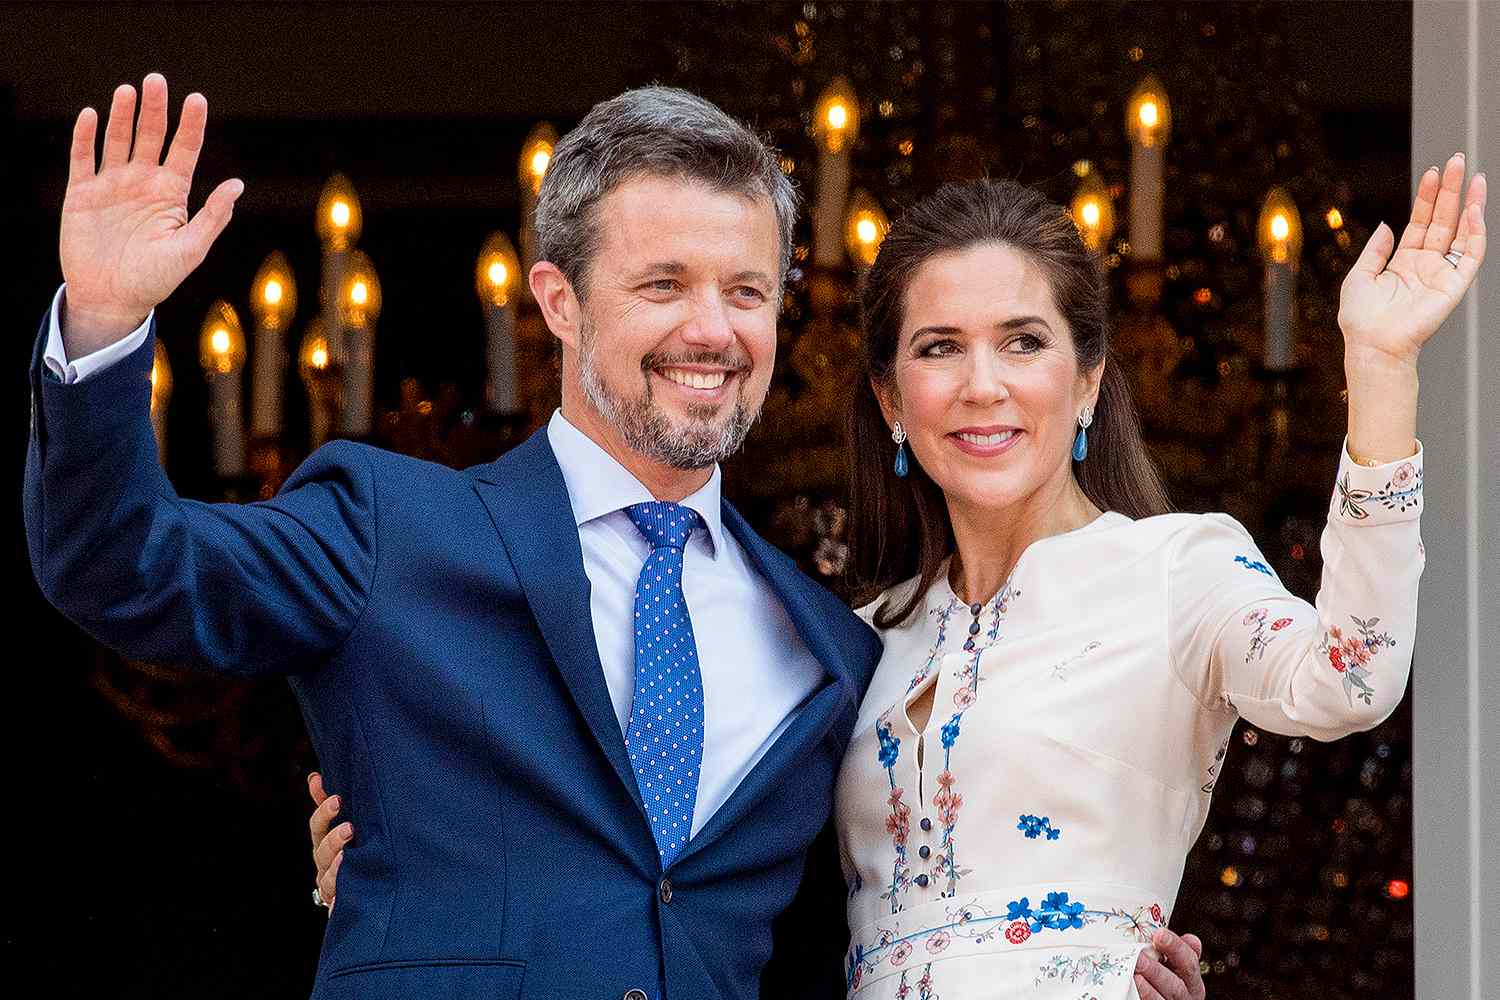 Crown Prince Frederik of Denmark and Crown Princess Mary of Denmark appear on the balcony as the Royal Life Guards carry out the changing of the guard on Amalienborg Palace square on the occasion of the 50th birthday of The Crown Prince Frederik of Denmark on May 26, 2018 in Copenhagen, Denmark.